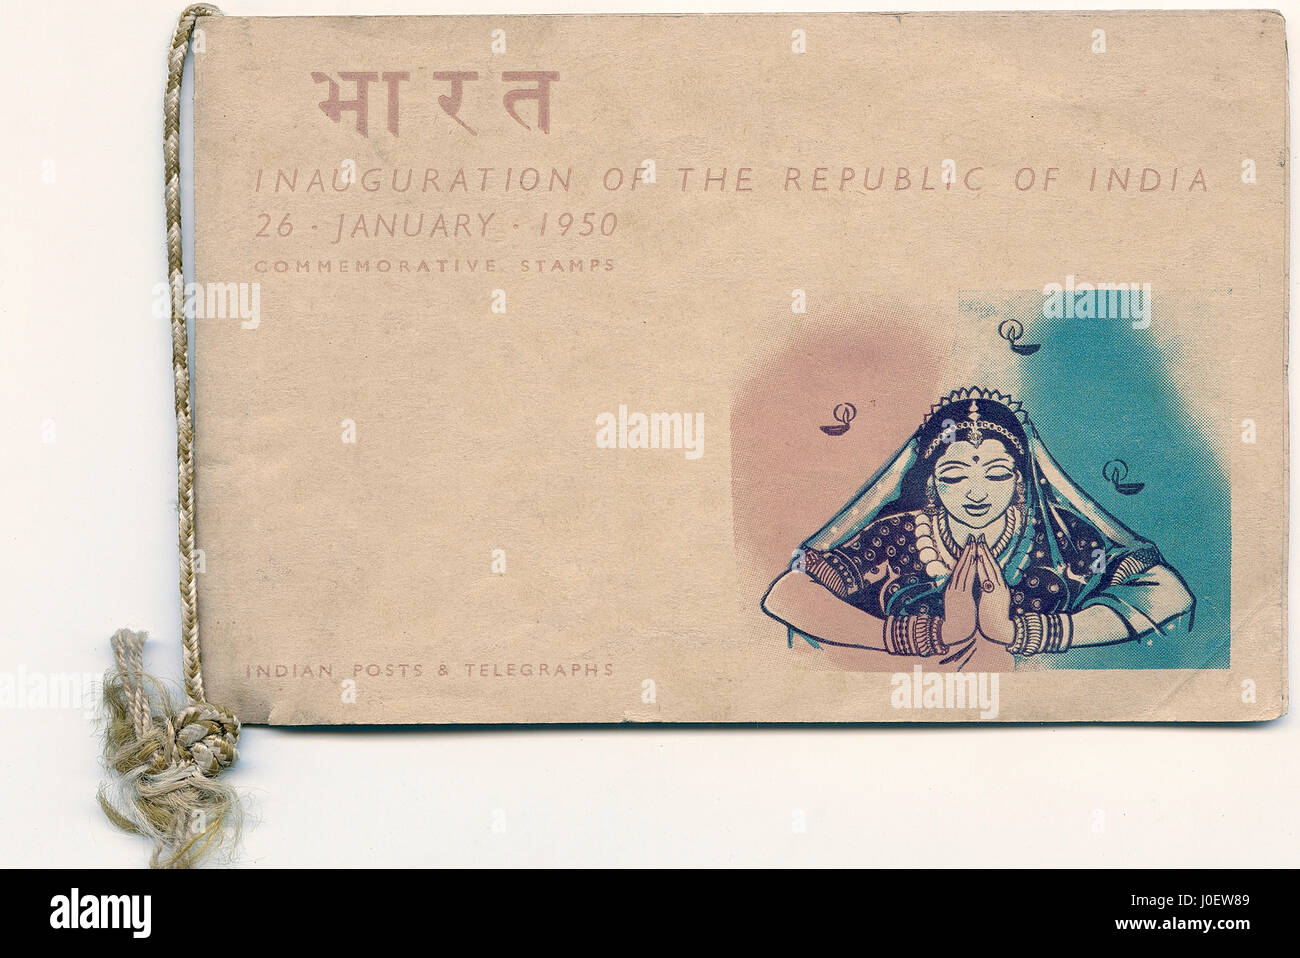 First day cover of republic of inauguration, india, asia Stock Photo